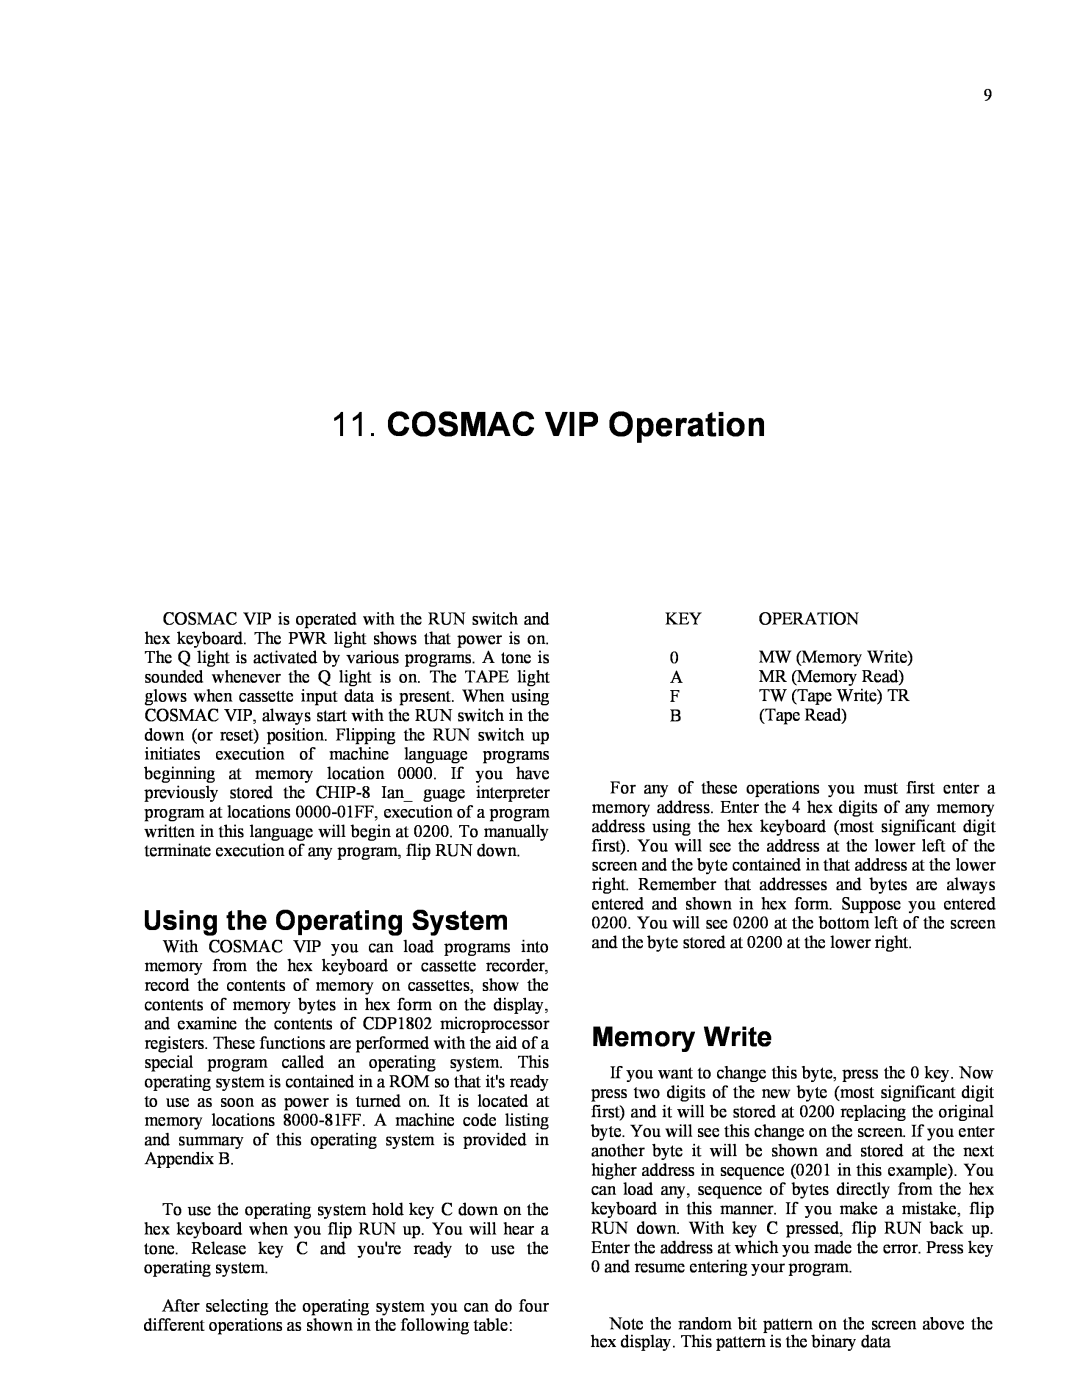 RCA CDP18S711 manual COSMAC VIP Operation, Using the Operating System, Memory Write 